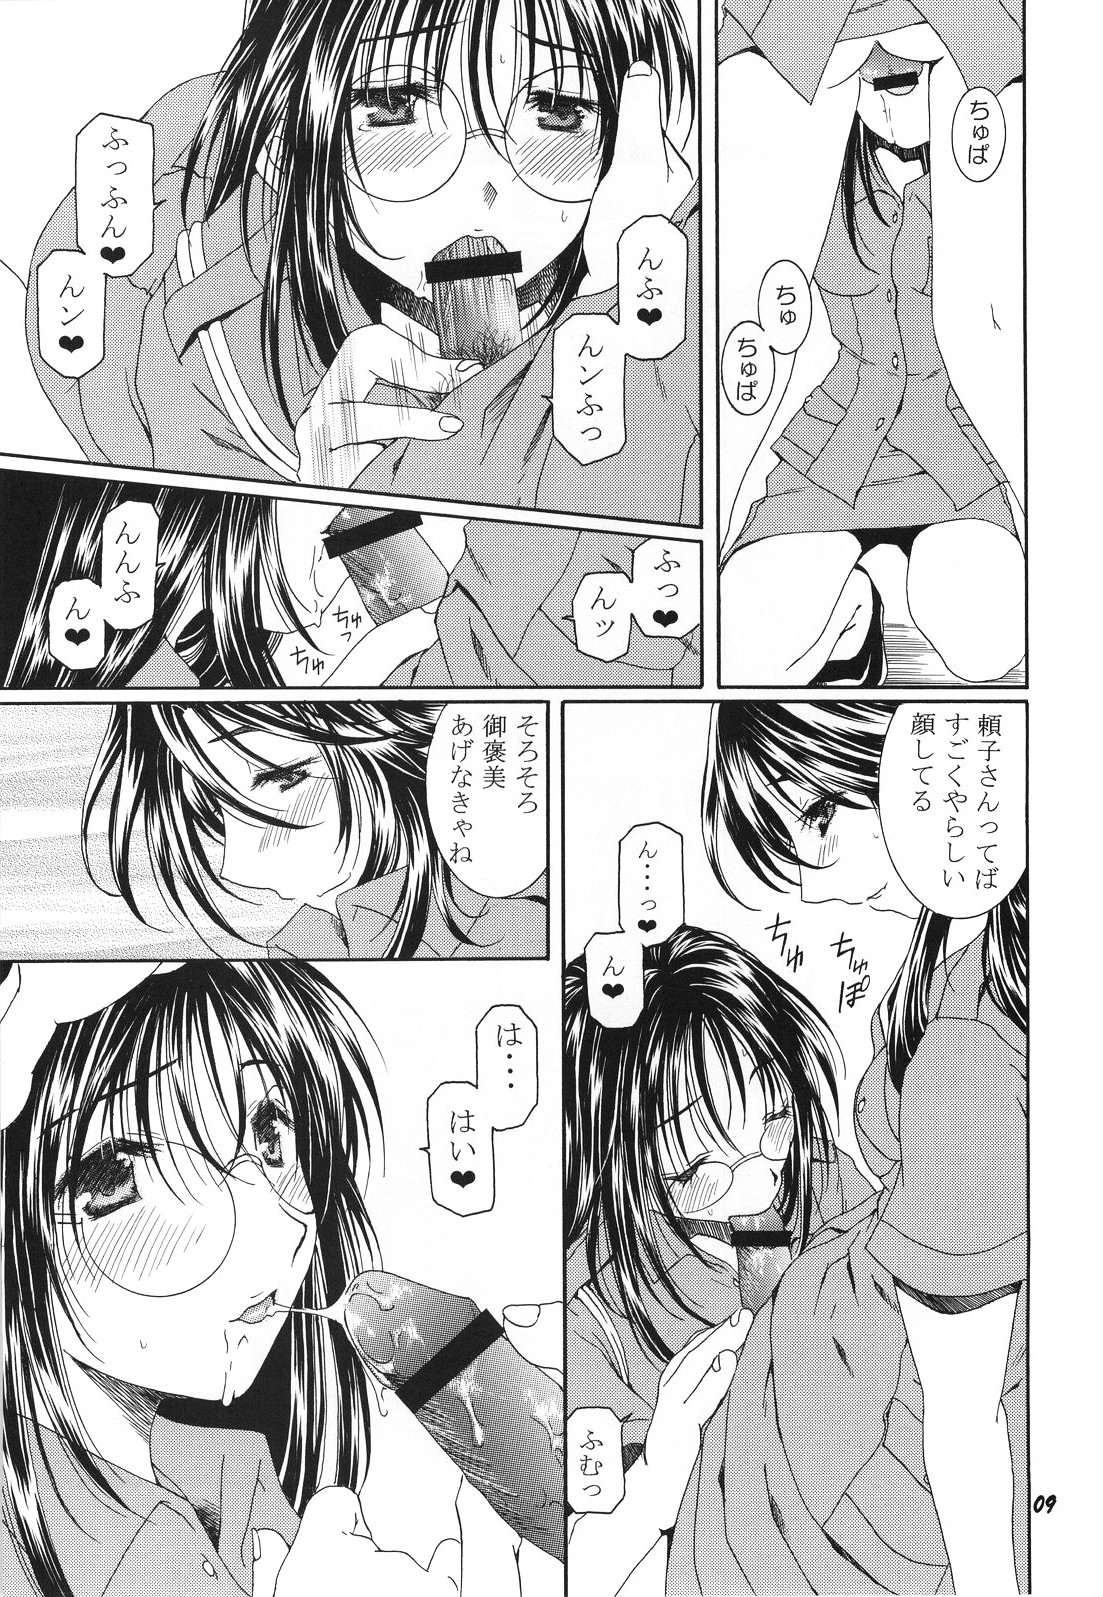 [Mechanical Code (Takahashi Kobato)] method to the madness 3 (You're Under Arrest!) page 8 full